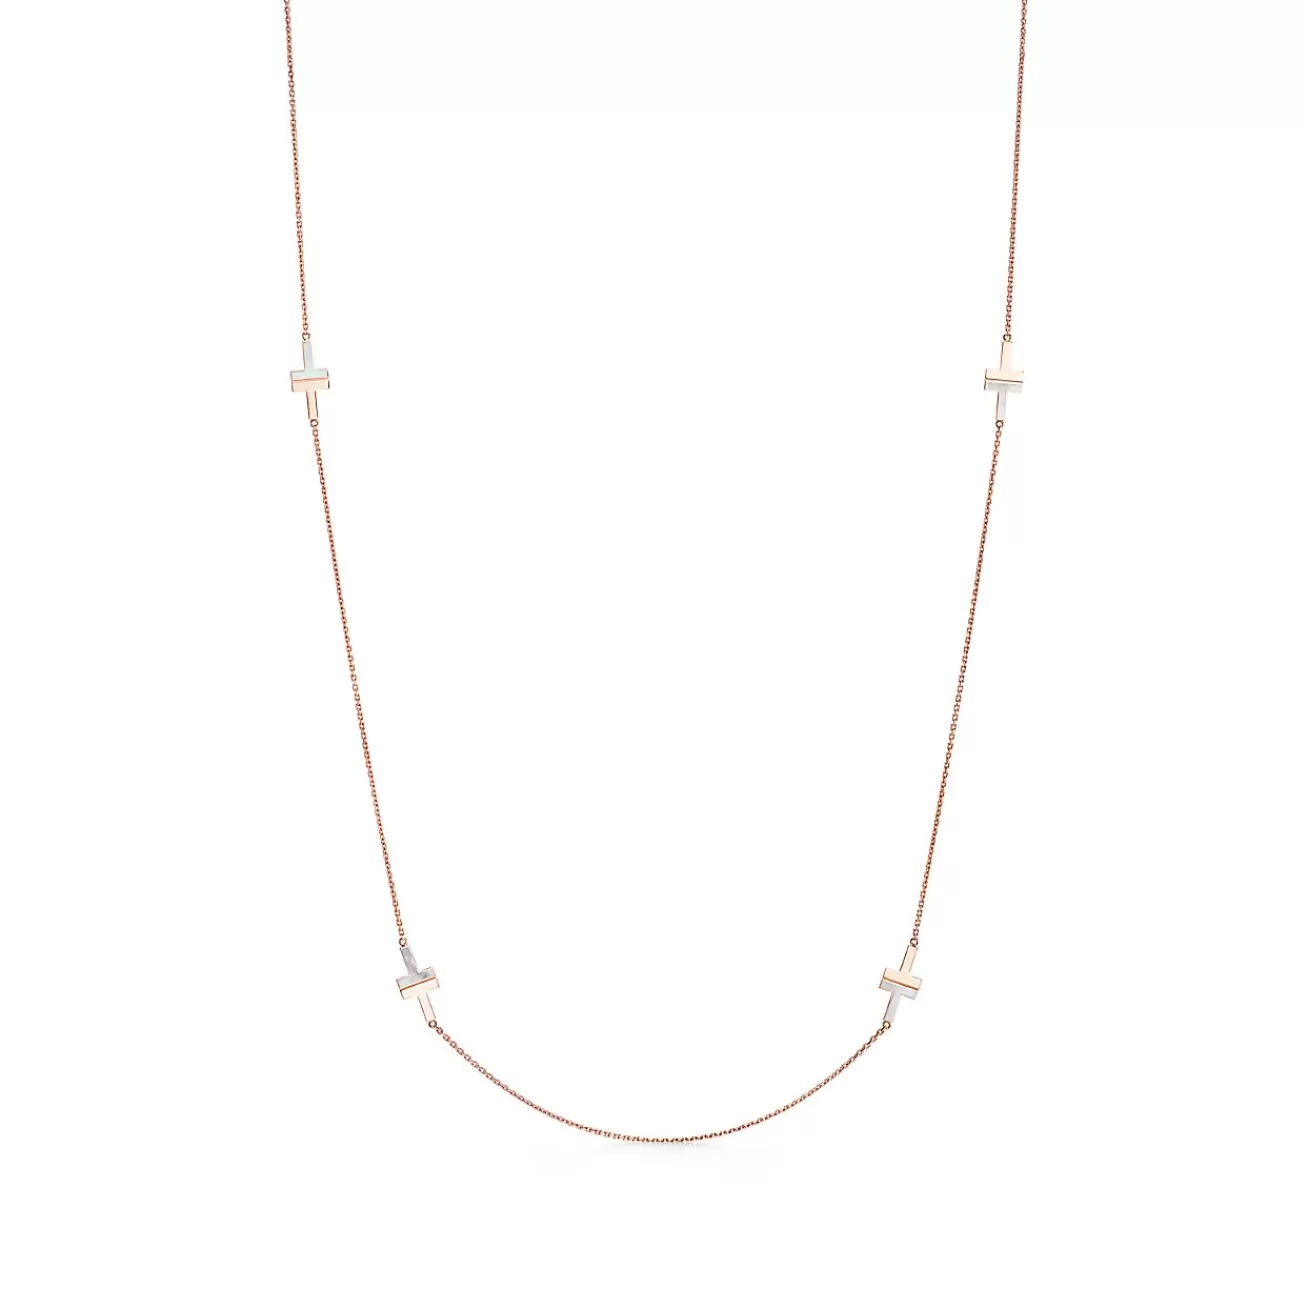 Tiffany & Co. Tiffany T mother-of-pearl station necklace in 18k rose gold. | ^ Necklaces & Pendants | Rose Gold Jewelry